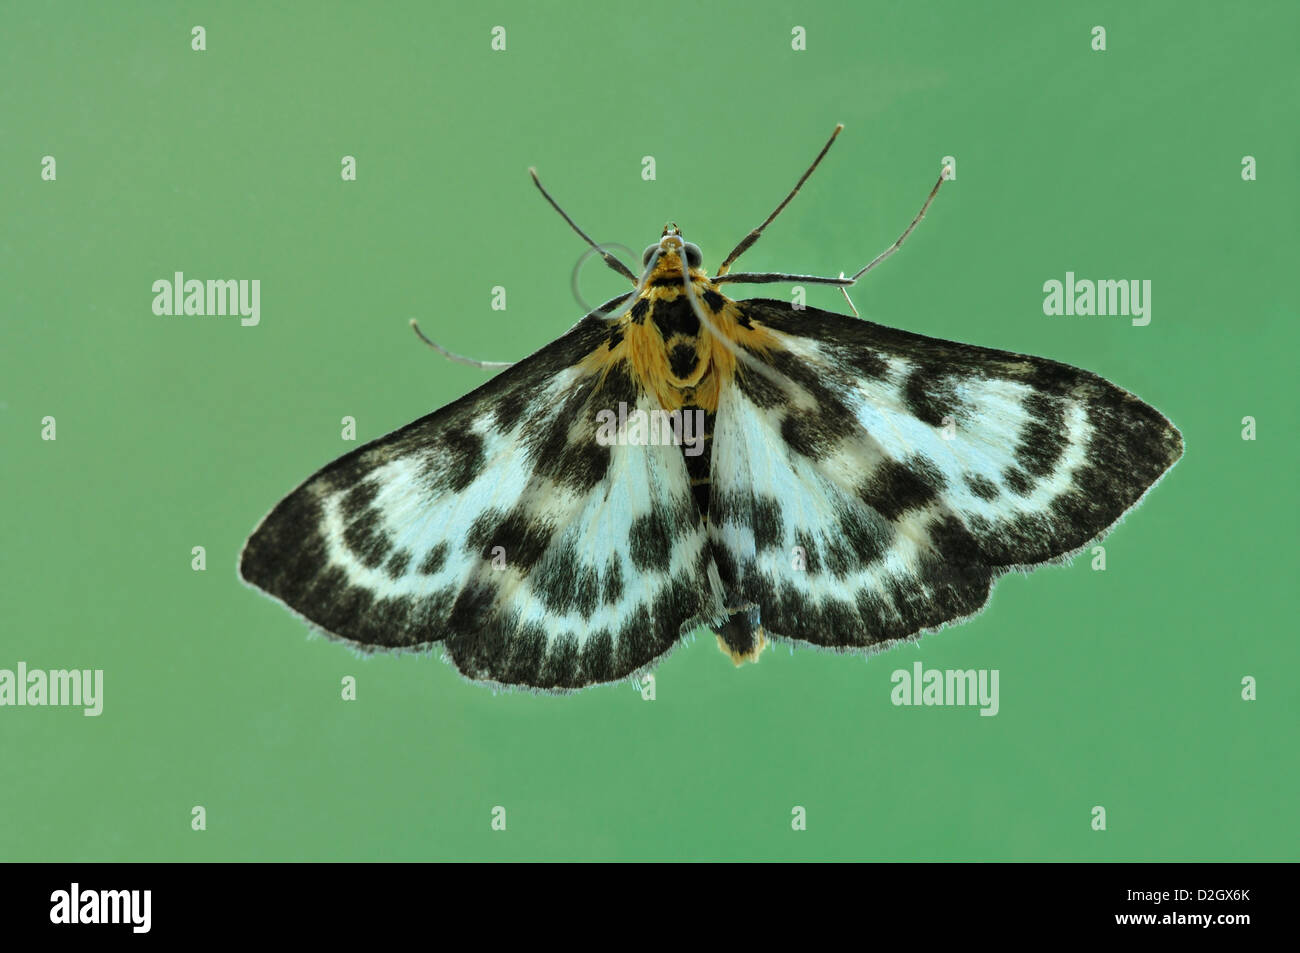 A small magpie moth on a plain background Stock Photo